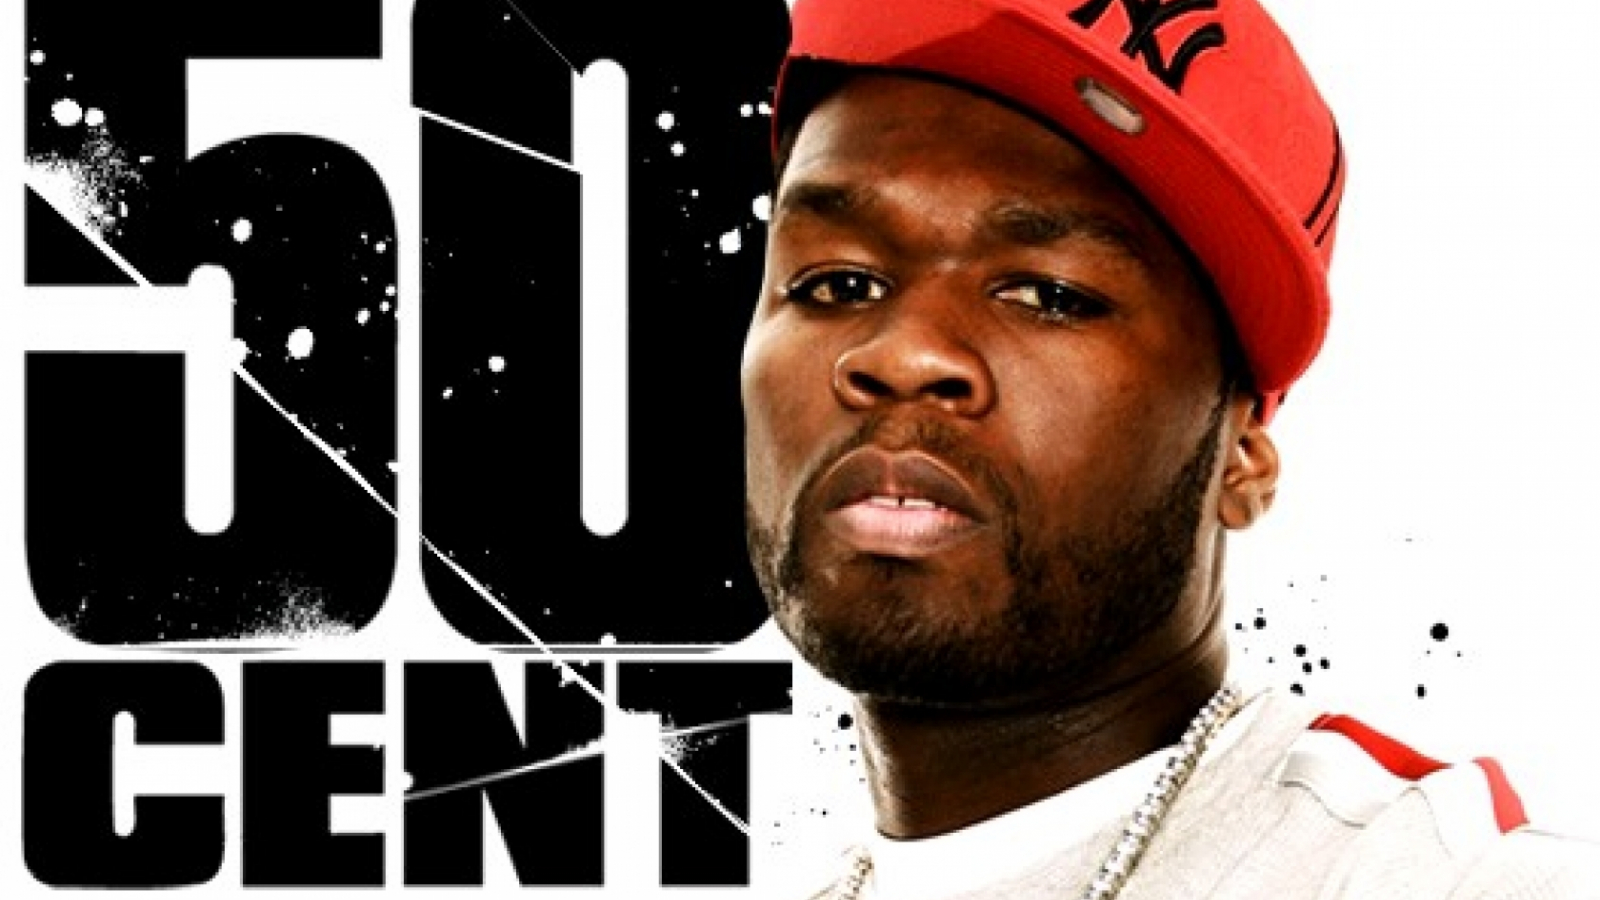 50 Cent wearing a red cap with his name on the left part